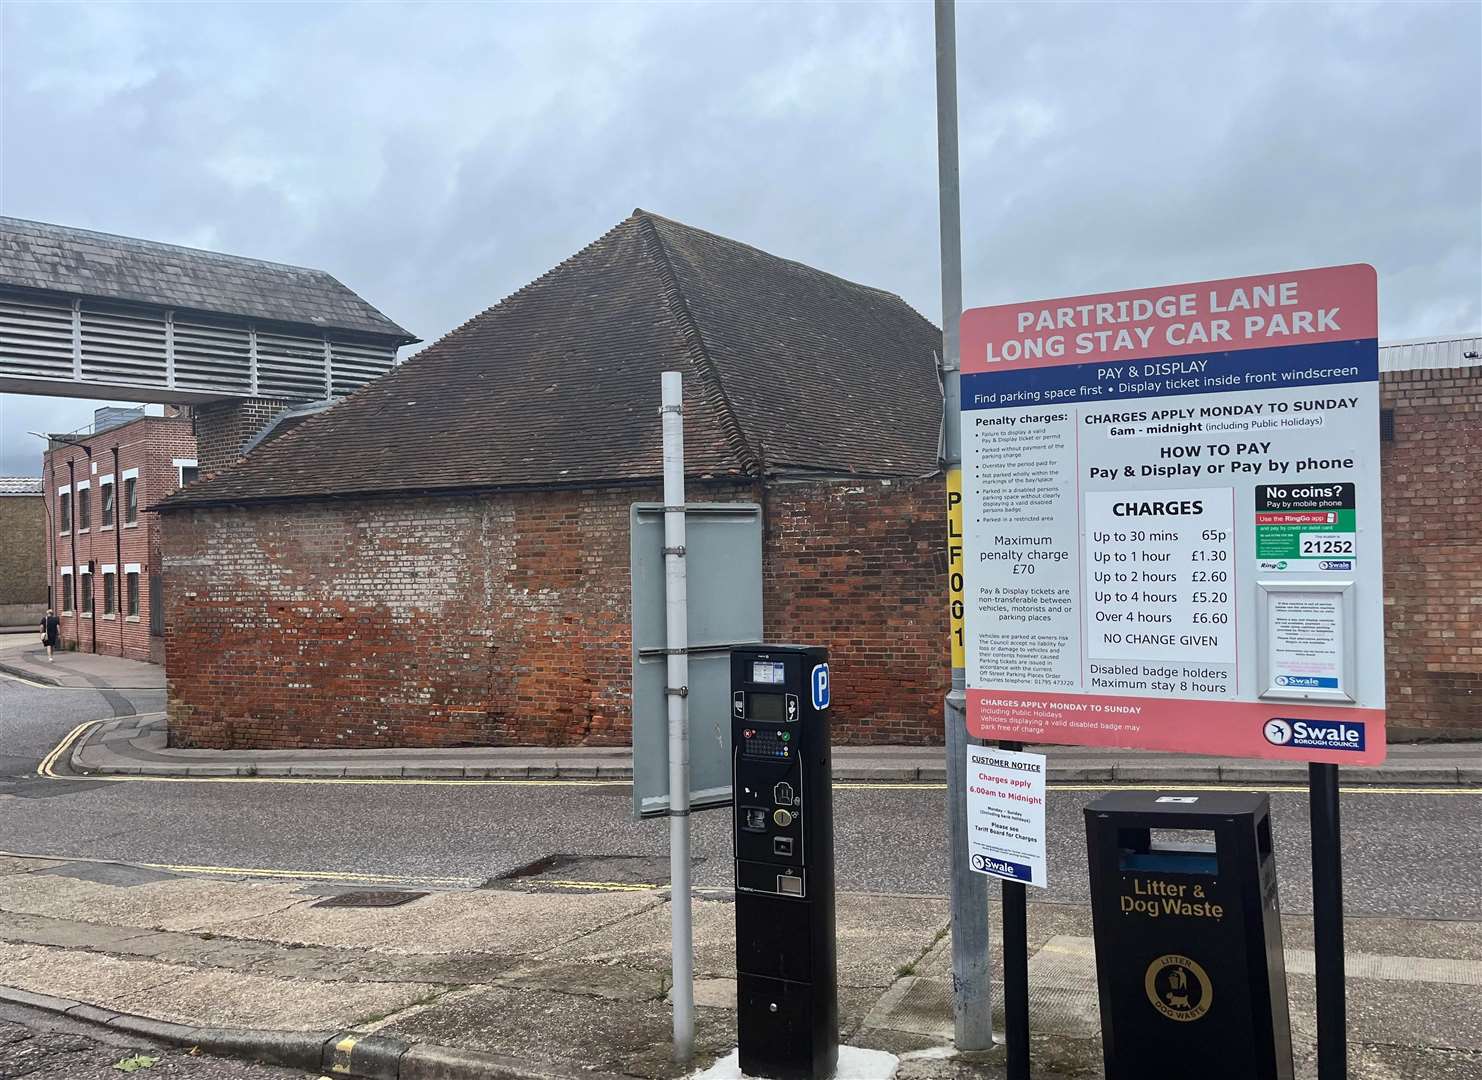 There is no longer free parking after 6pm at most car parks in Faversham